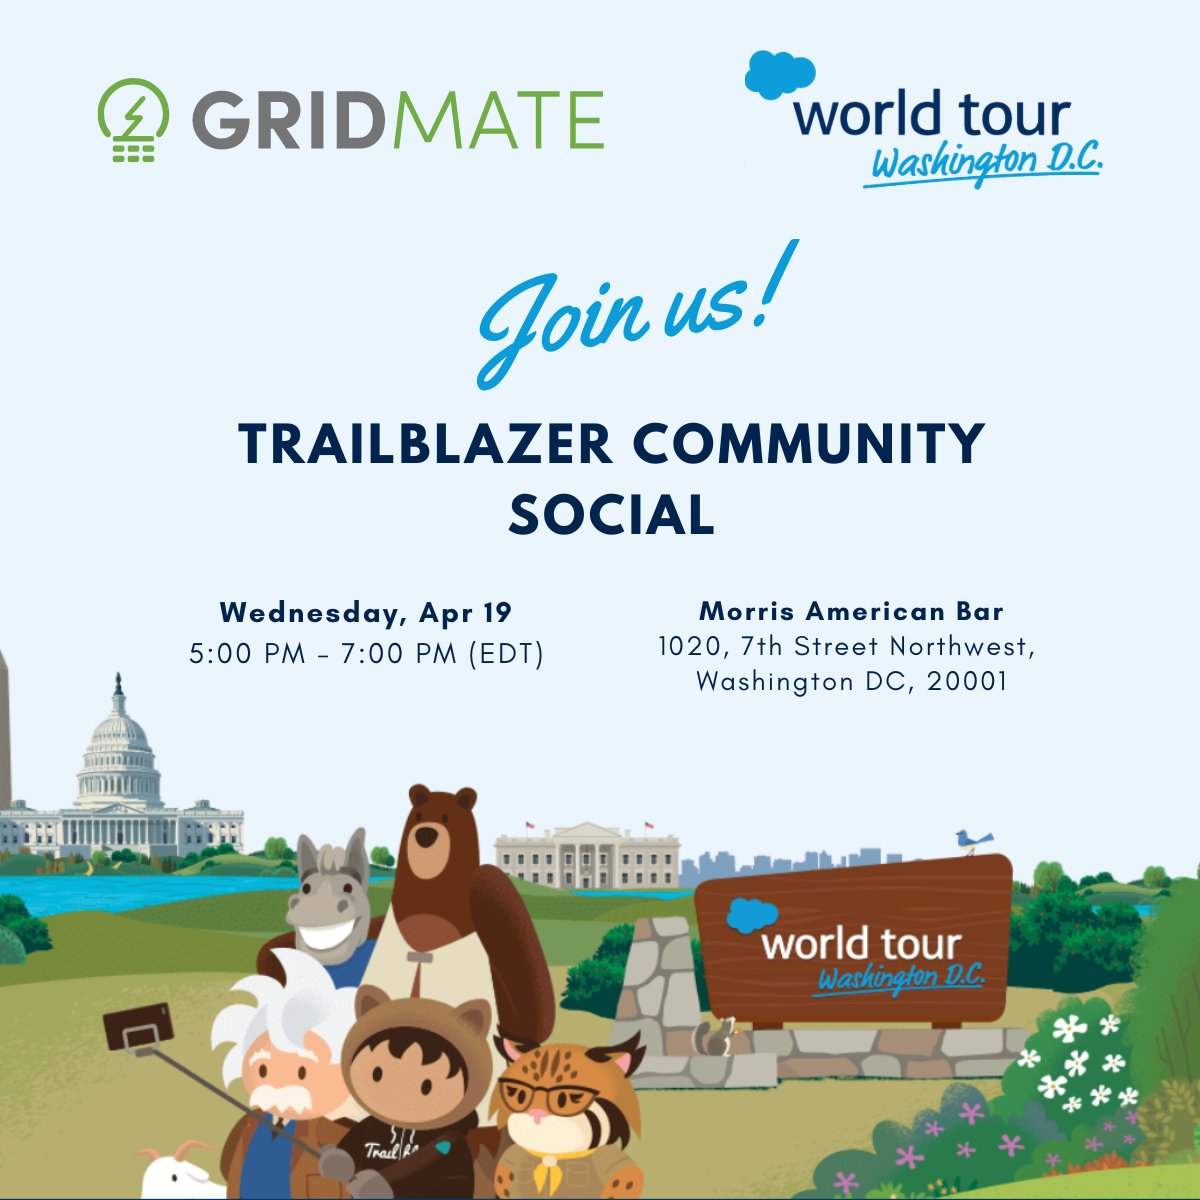 We will be at the World Tour in Washington DC on April 19th and we are also sponsoring the Trailblazer Community Social happening afterwards. Looking forward to networking with those attending.

#WorldTourDC #TrailblazerCommunity